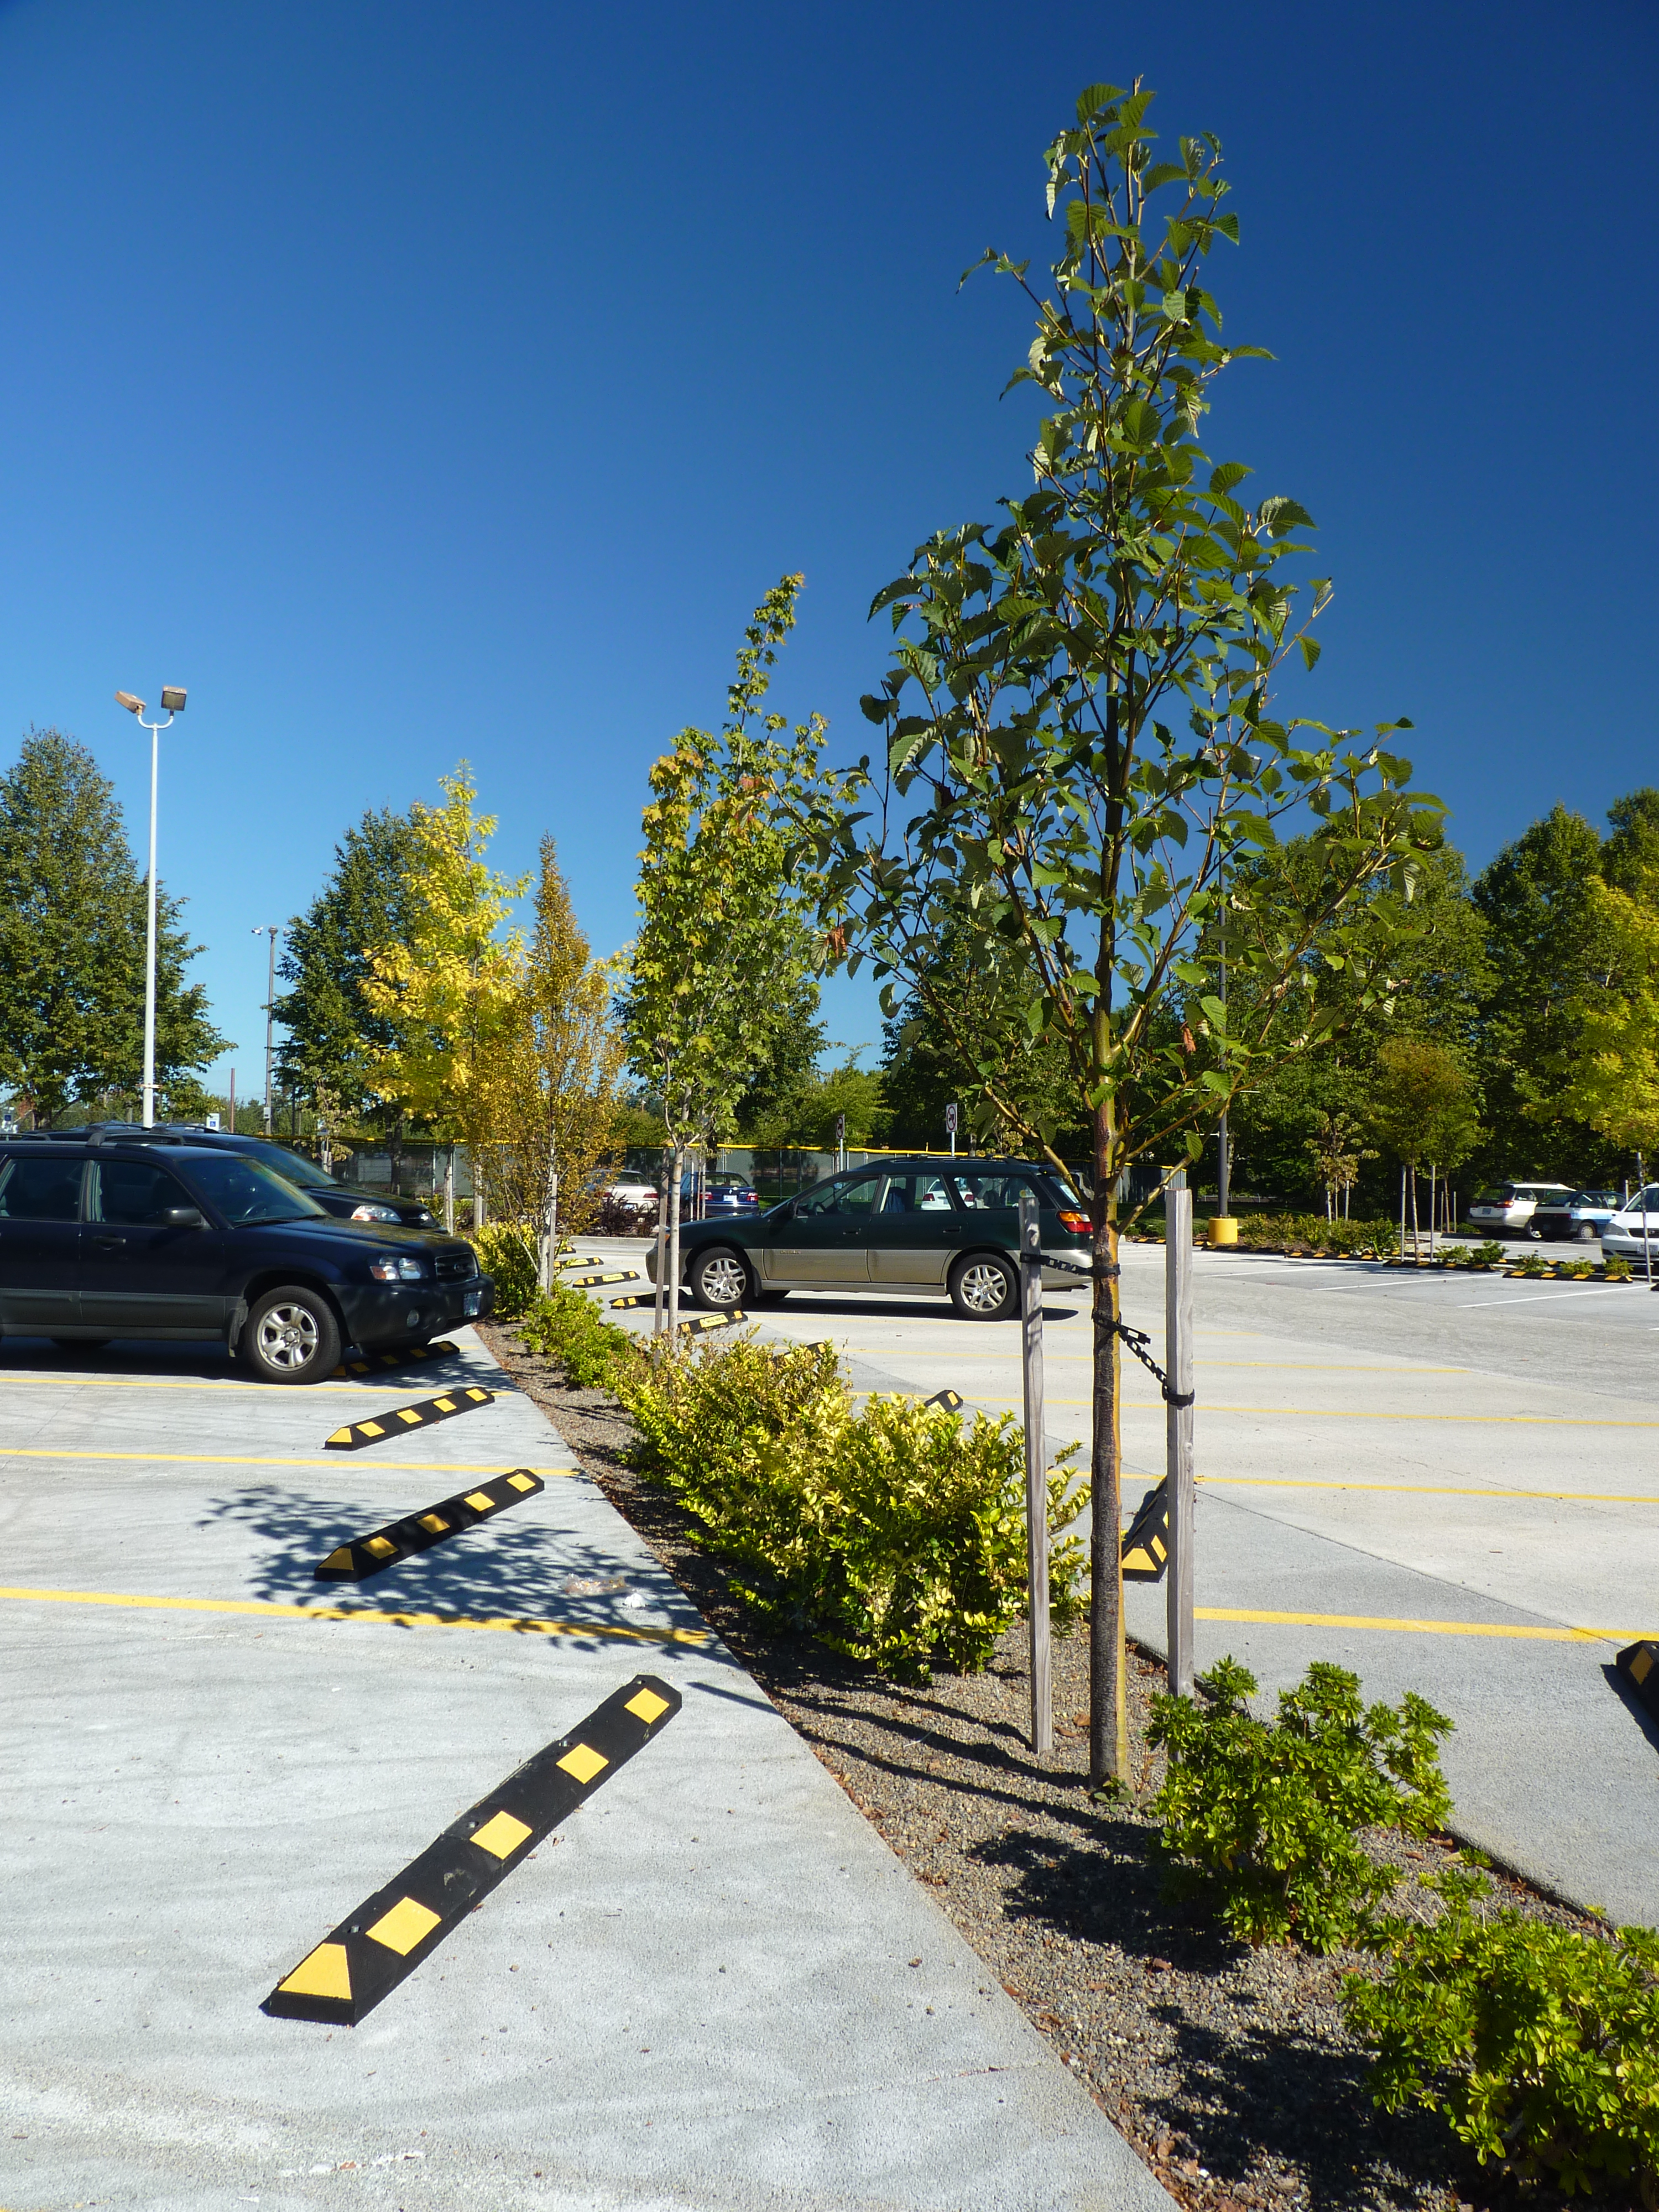 Parking Forest: As if Mother Nature designed a parking lot